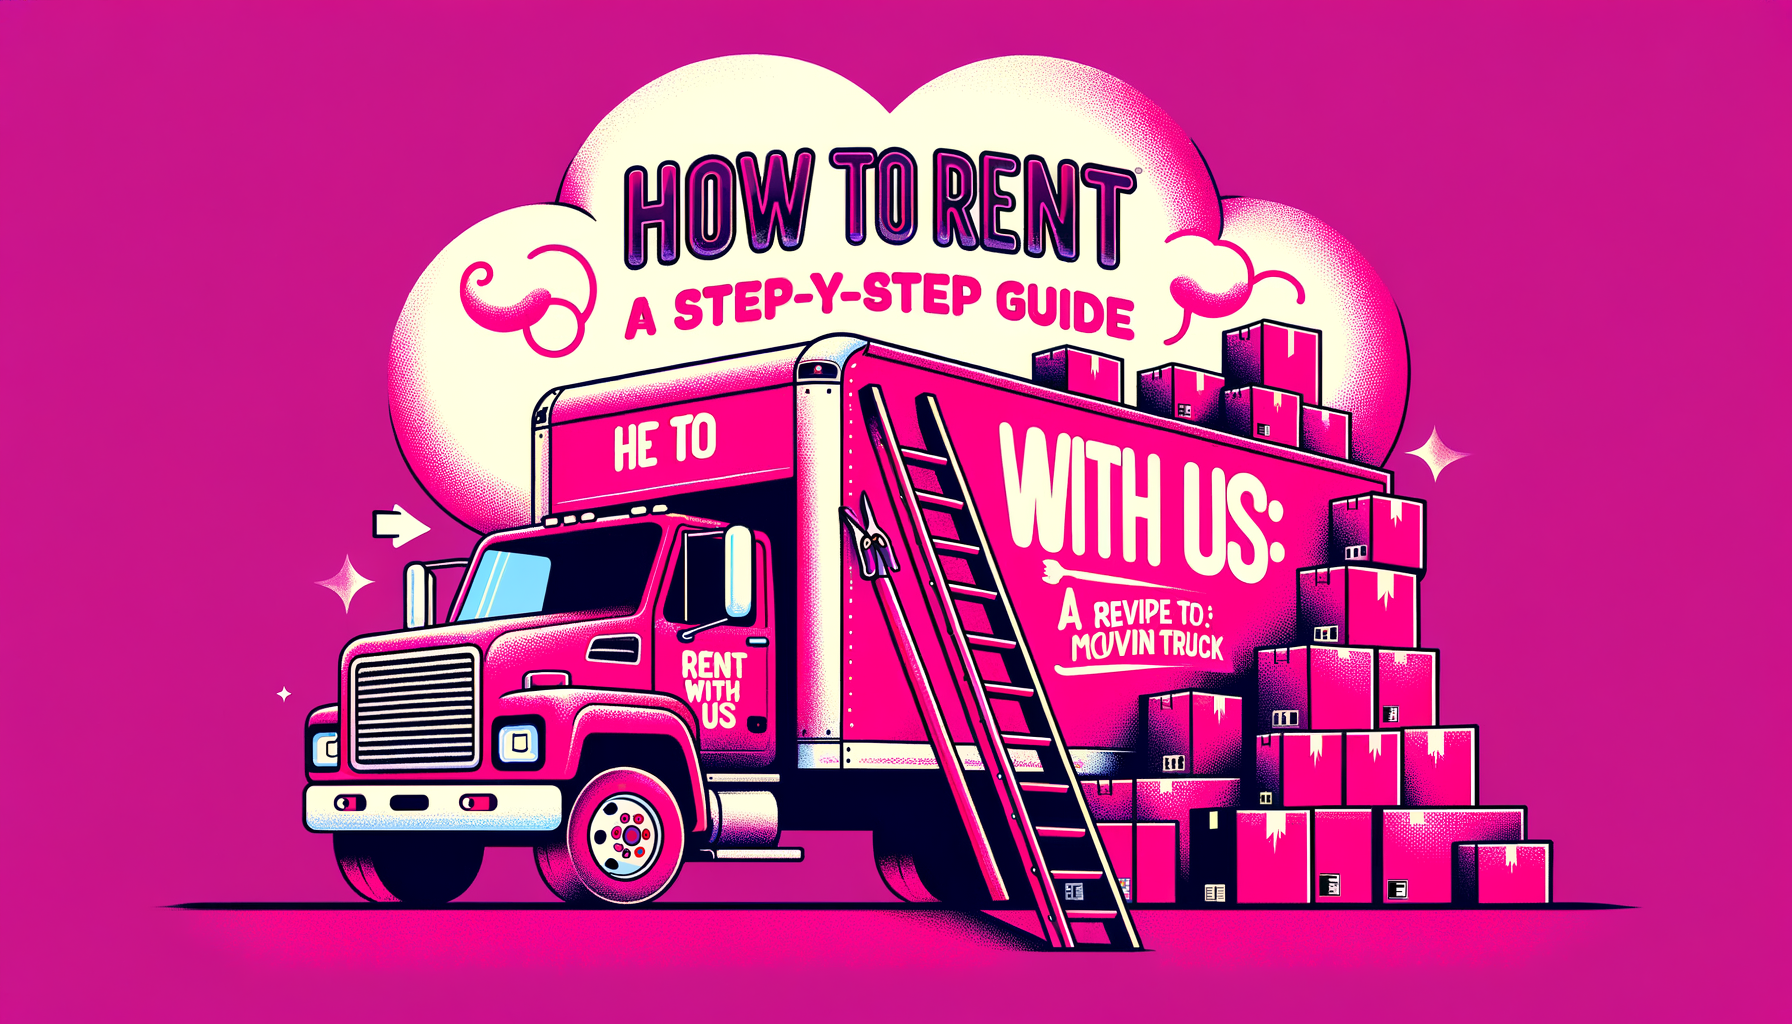 Cartoon-like illustration in fuschia tones showing a step-by-step guide to renting with Ryder, featuring a cheerful person holding a key in front of a Ryder rental truck.